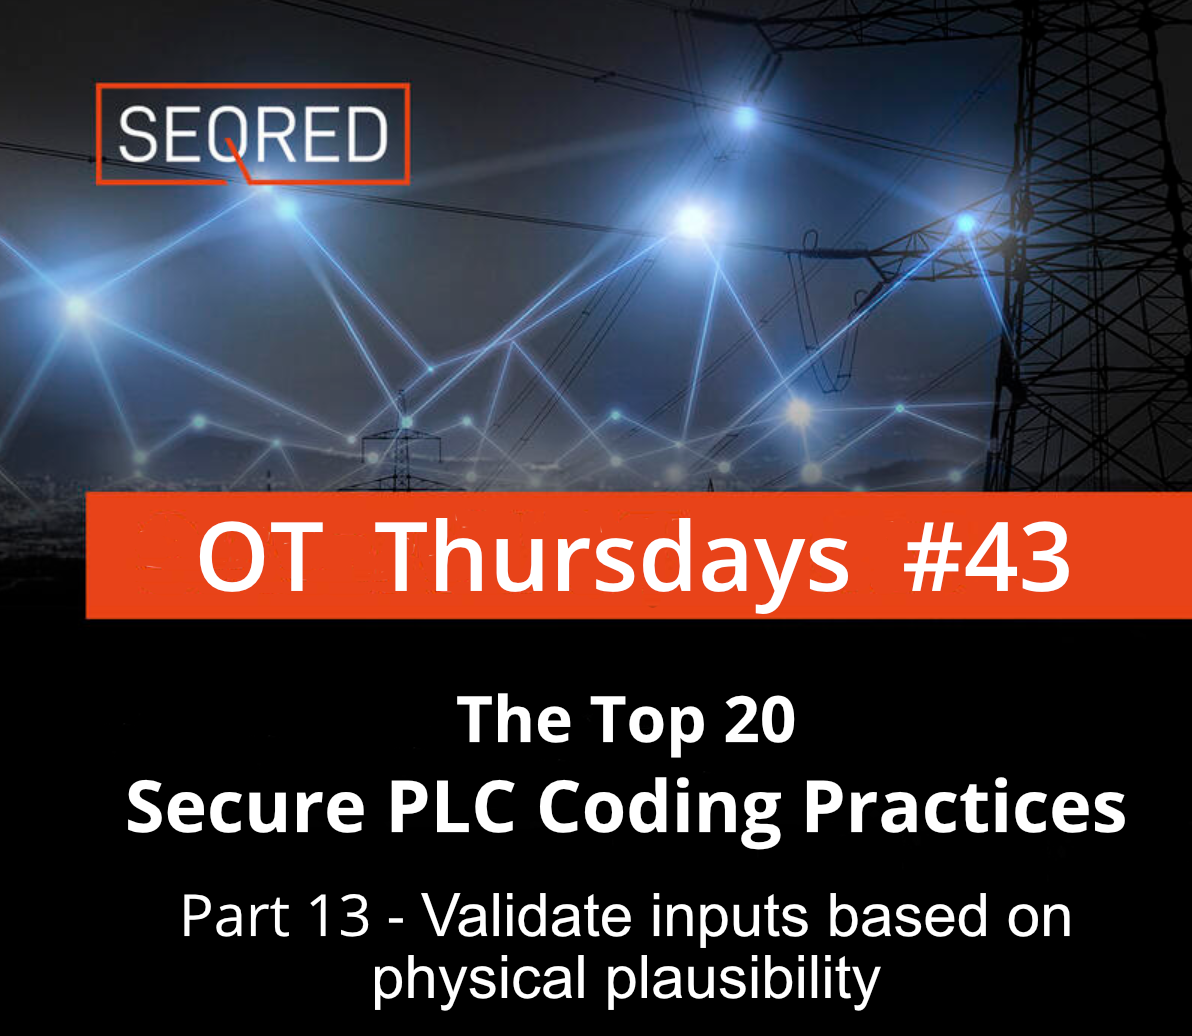 The Top 20 Secure PLC Coding Practices. Part 12 - Instrument for plausibility checks